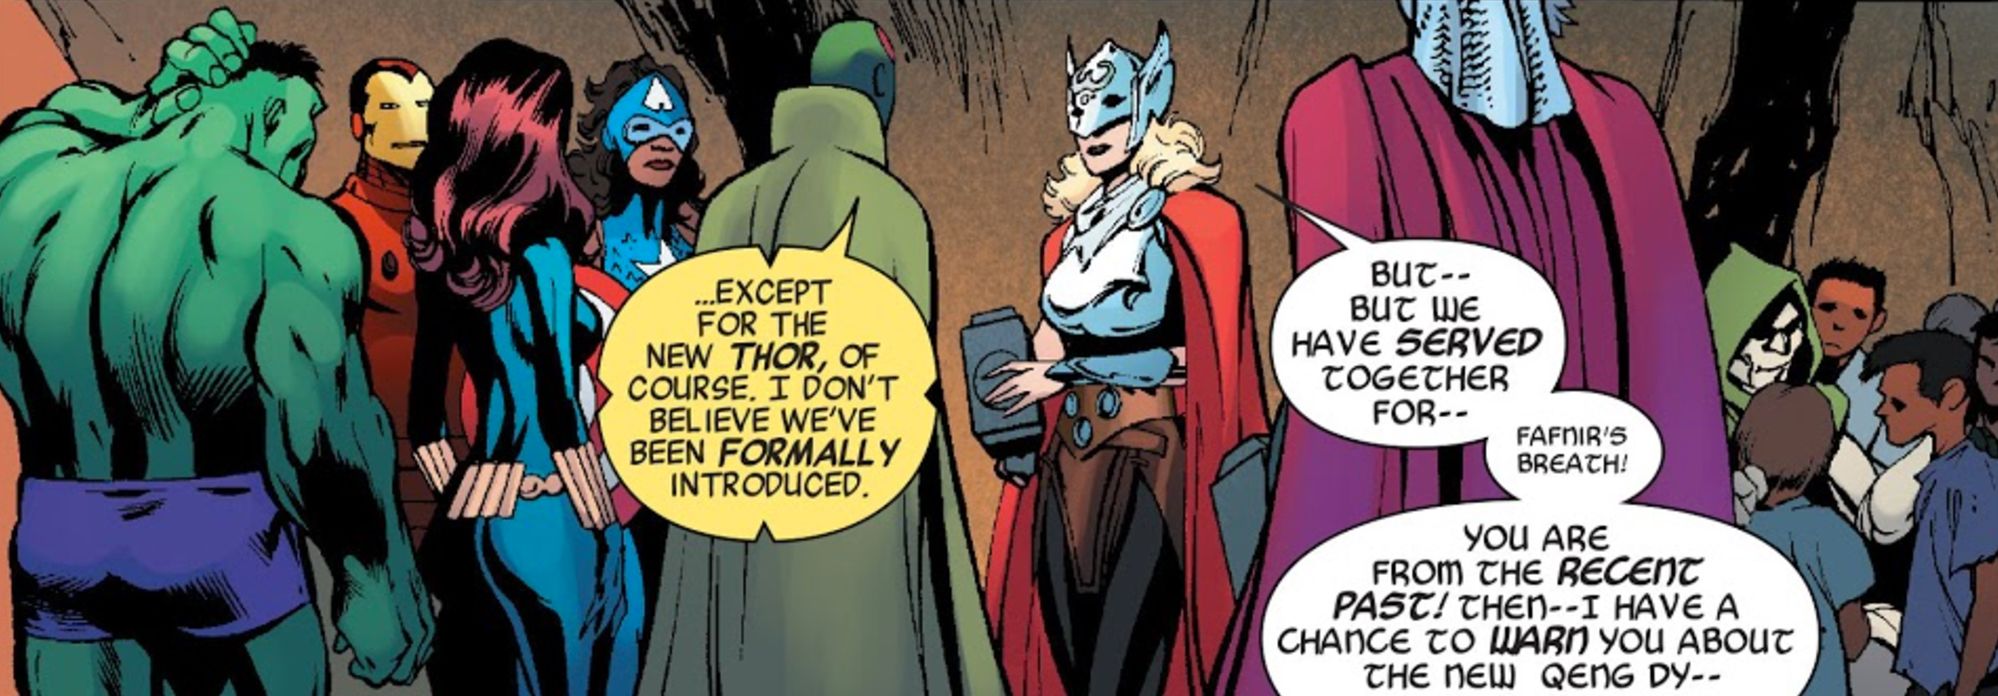 Thor Warns of The new Qeng Dynasty in Avengers Ultron Forever